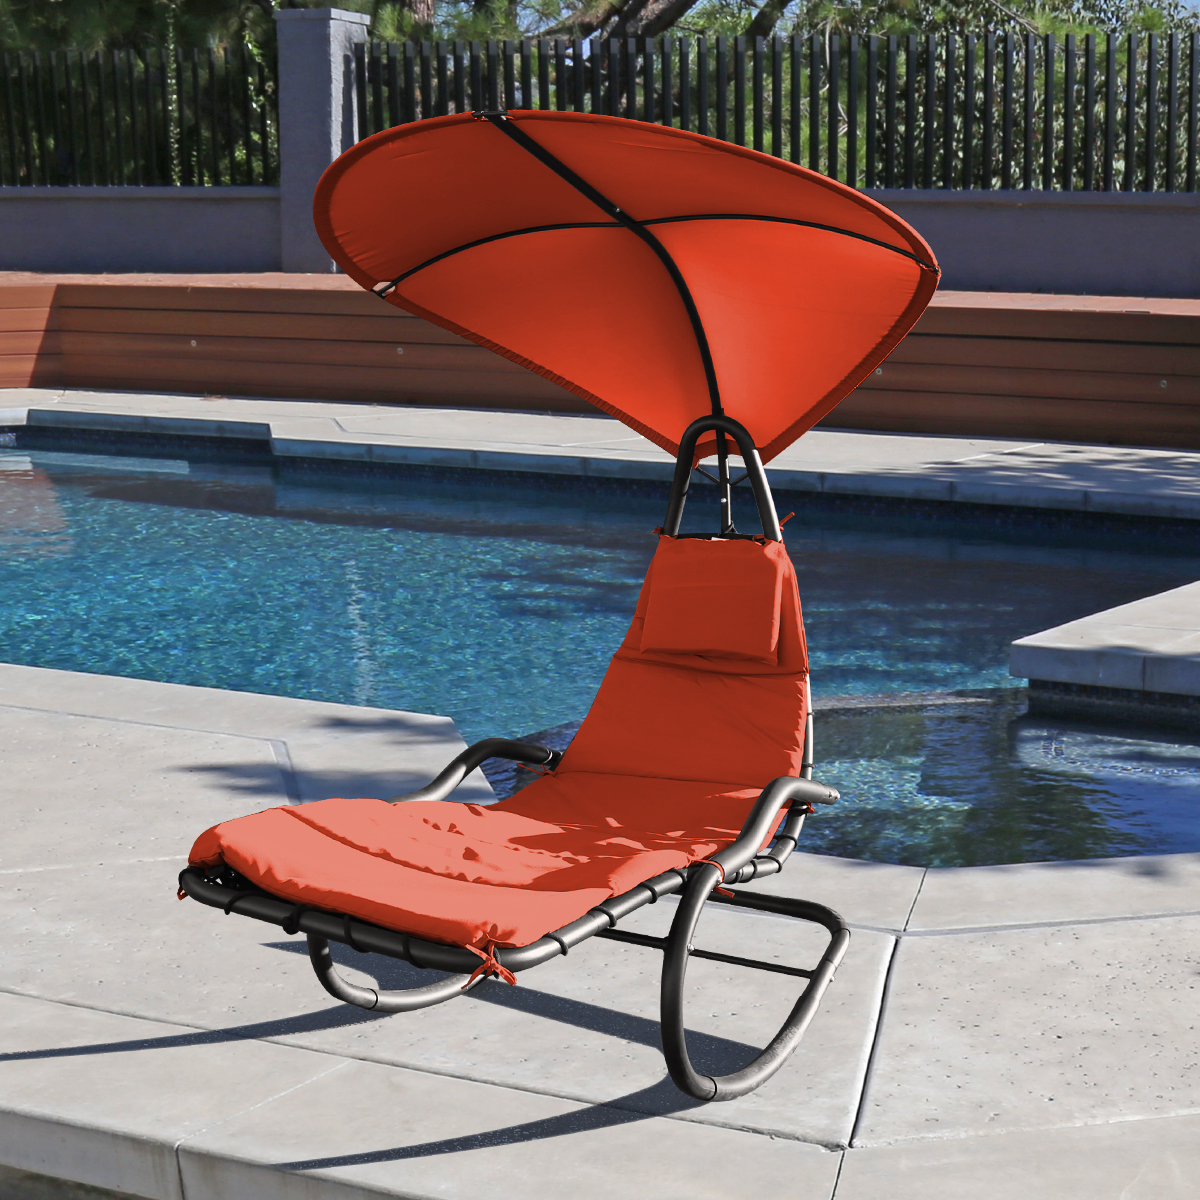 Rocking Hanging Lounge Chair - Curved Chaise Rocking Lounge Chair Swing For Backyard Patio w/ Built-in Pillow Removable Canopy with stand {Orange} - image 2 of 8